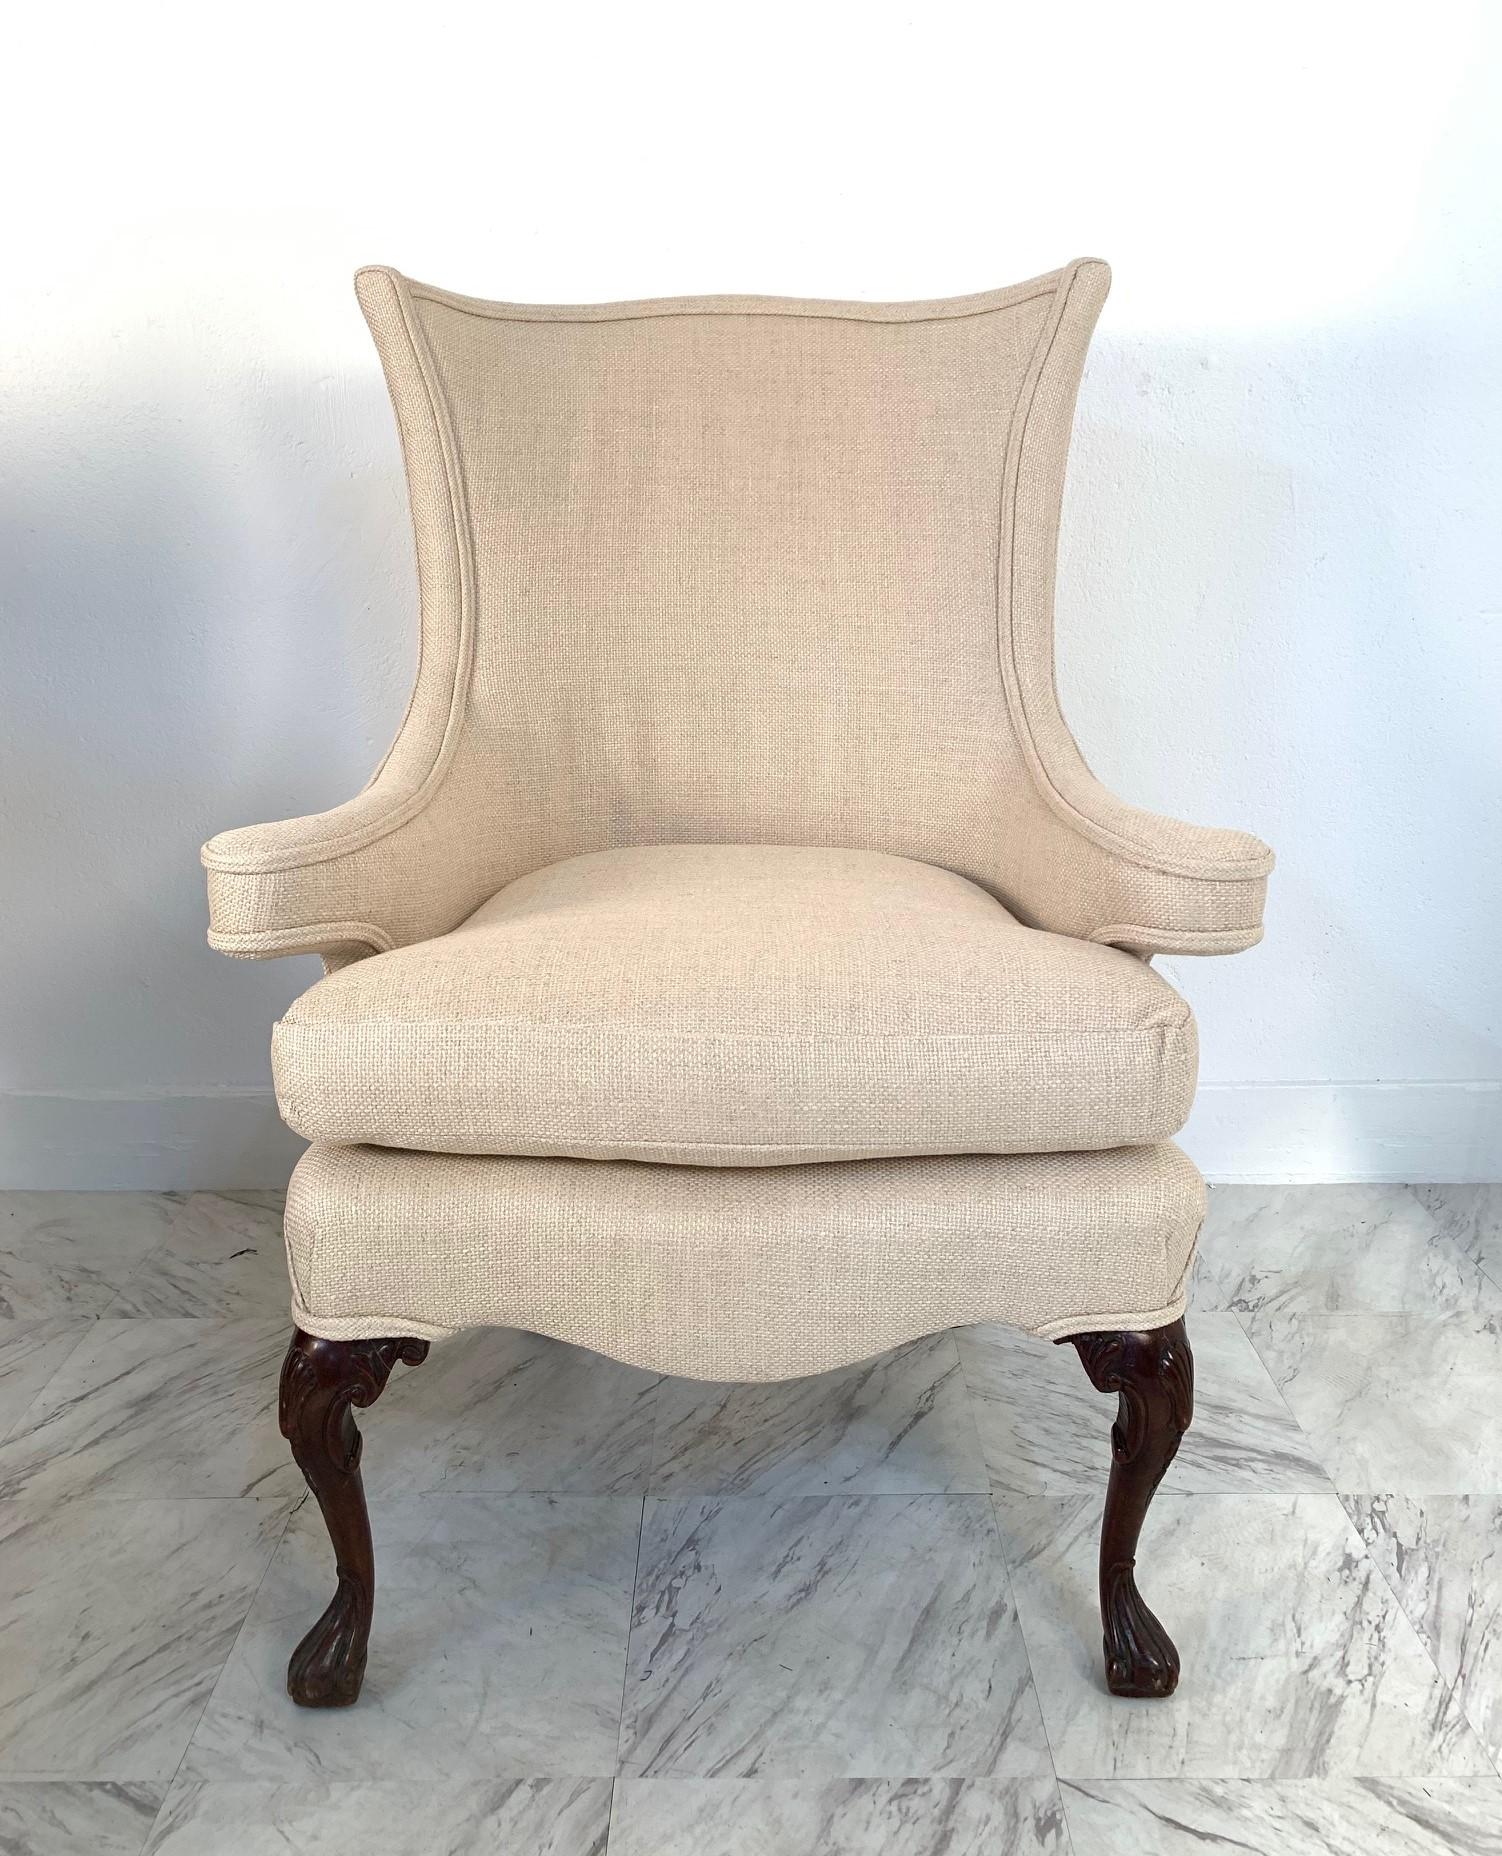 Pair of Queen Anne style wingback chairs upholstered in linen. Has mahogany claw feet.